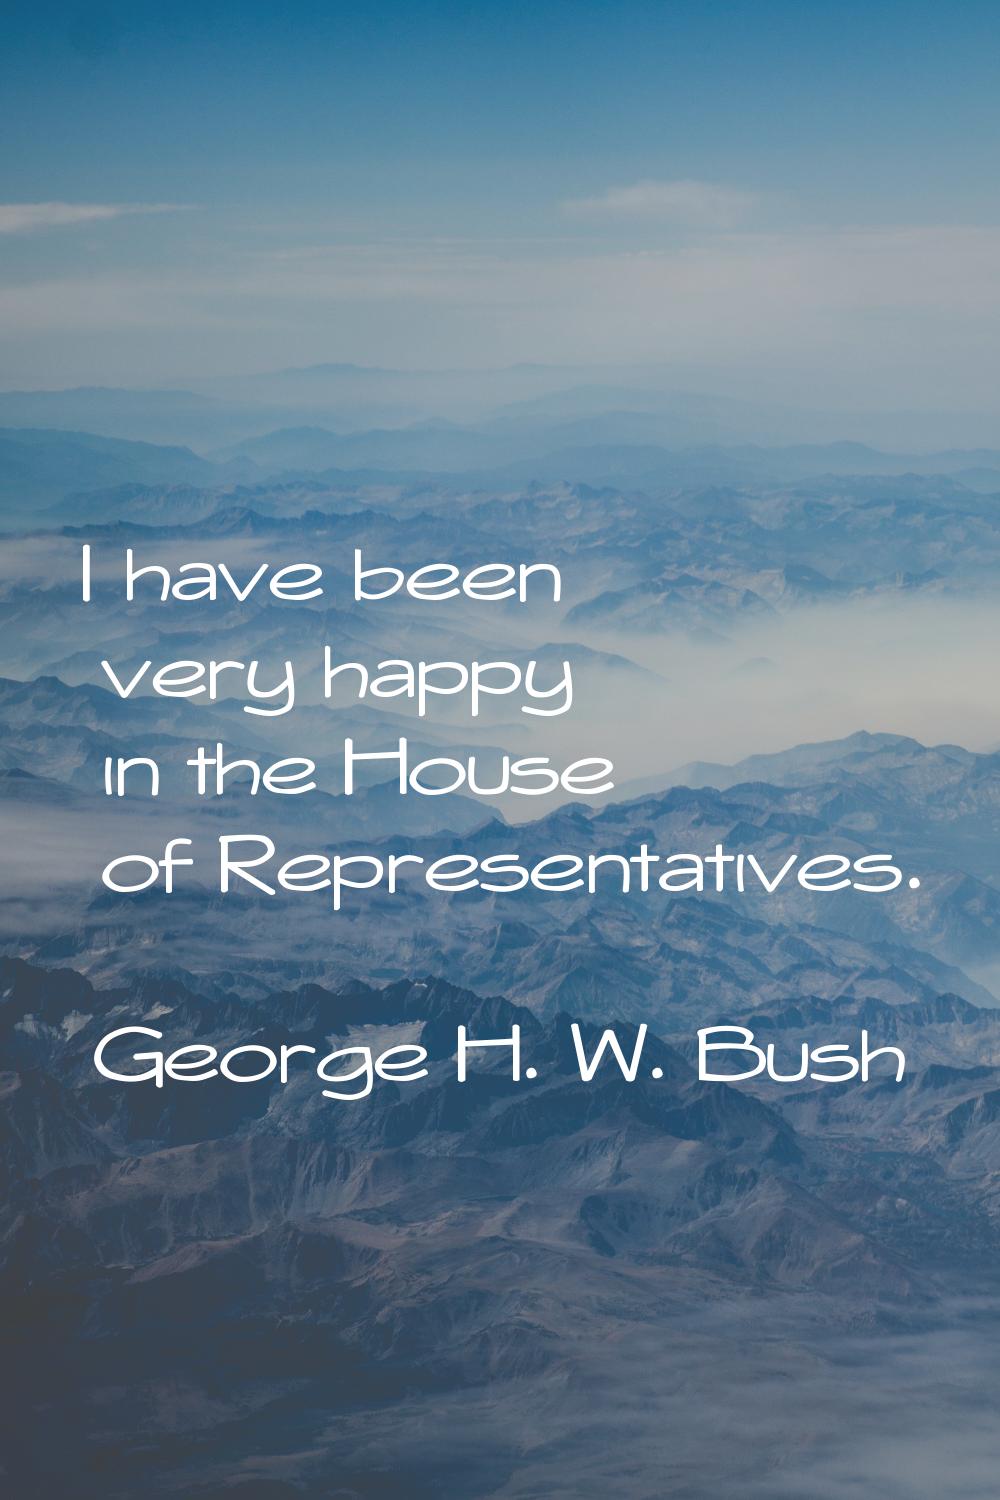 I have been very happy in the House of Representatives.